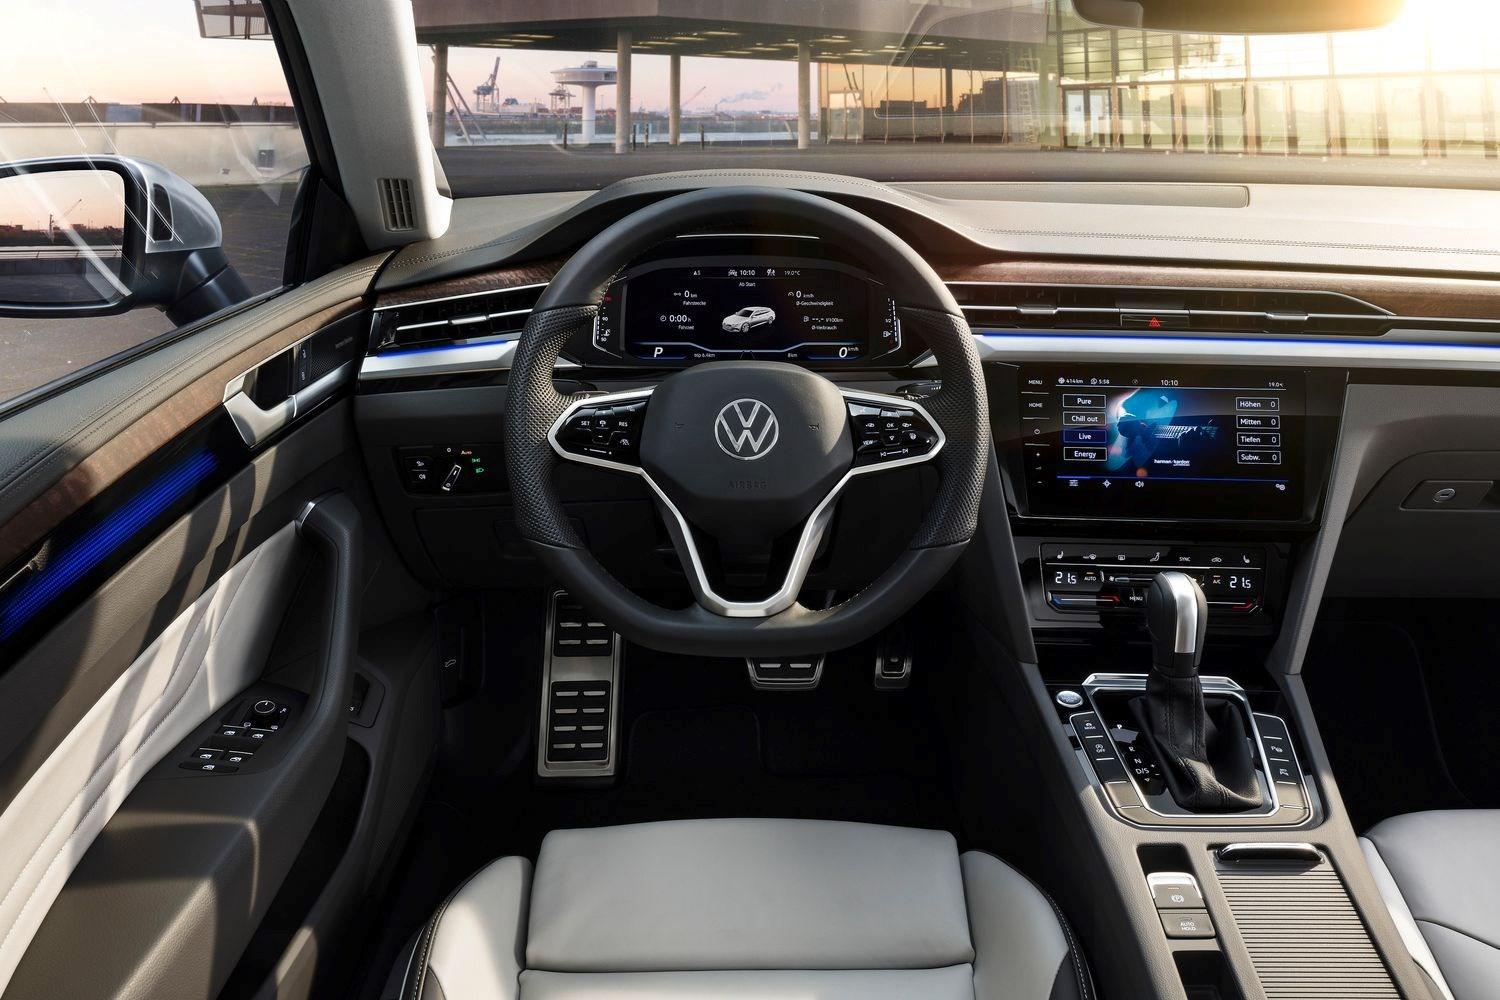 Interior view of the new Volkswagen Arteon Shooting Brake, close-up of spacious front passenger seats and dashboard from driver side